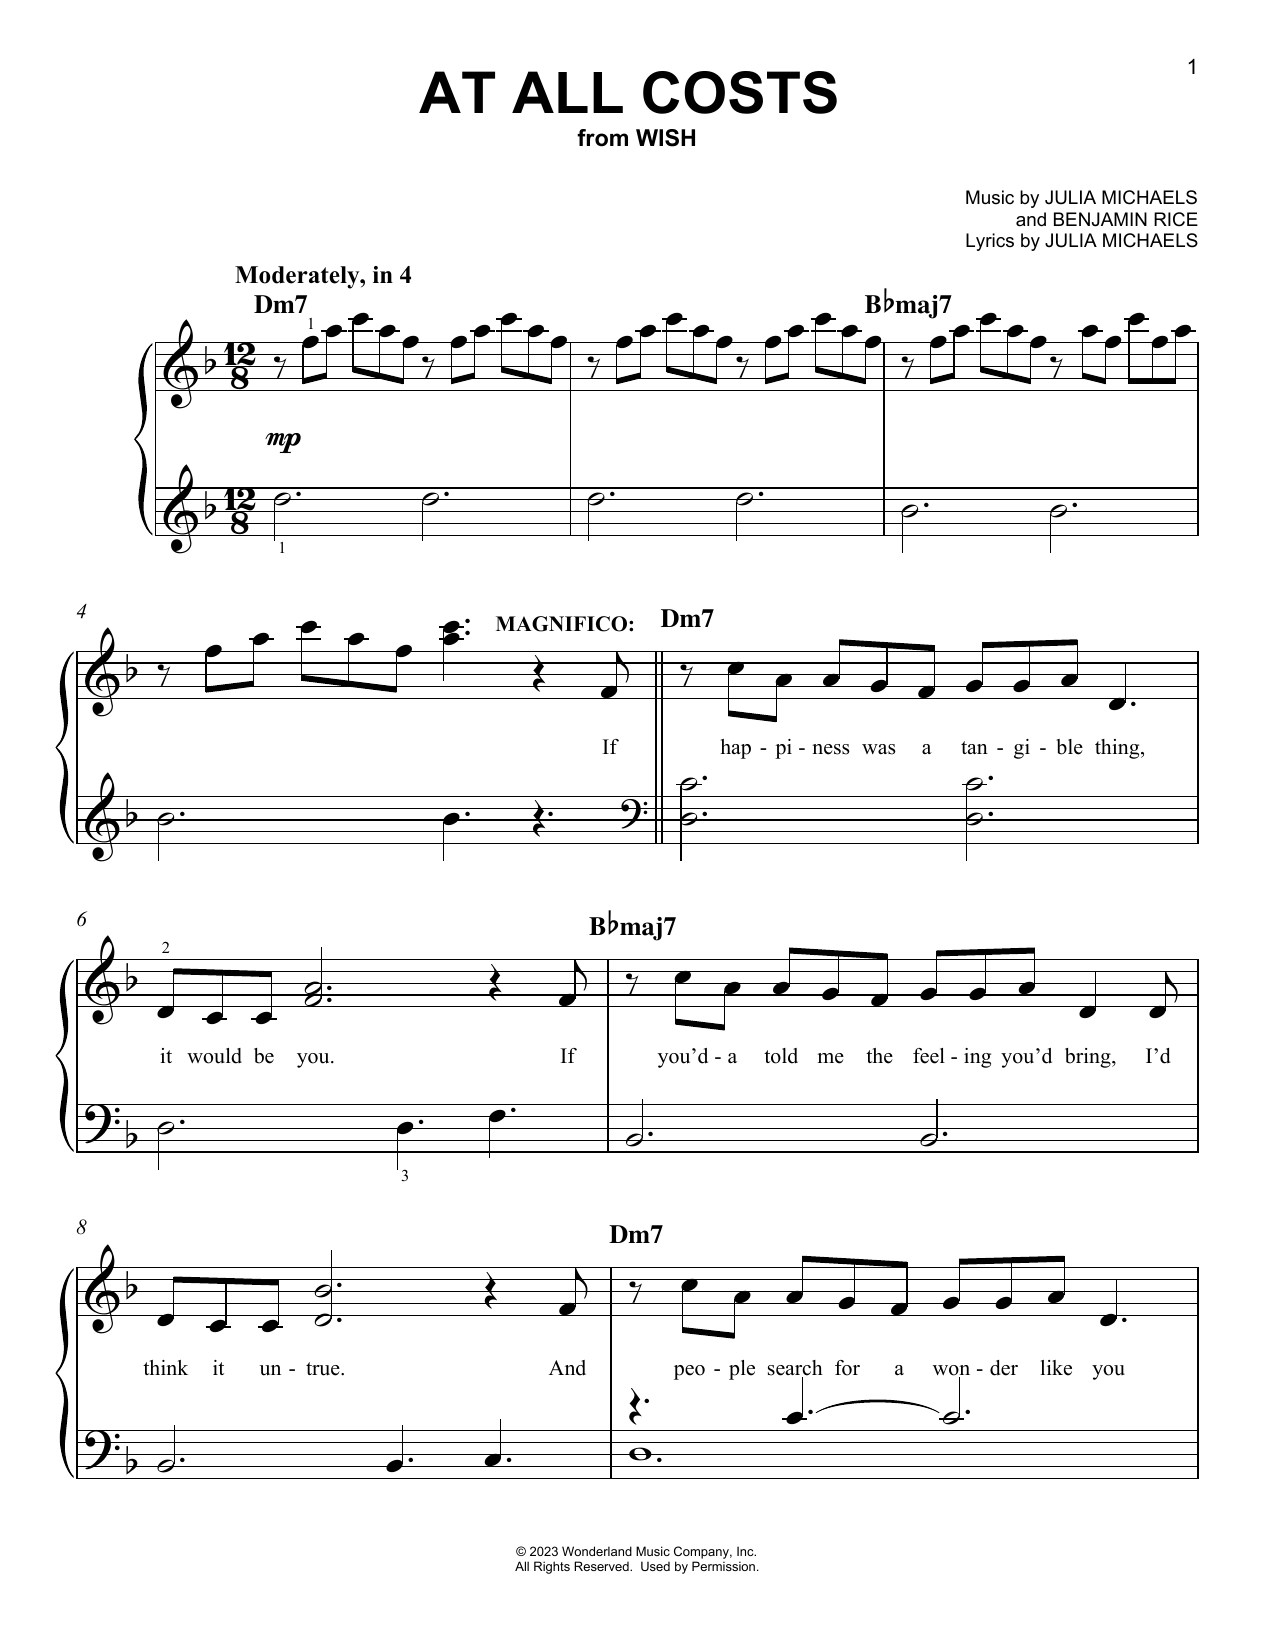 Chris Pine and Ariana DeBose At All Costs (from Wish) sheet music notes printable PDF score